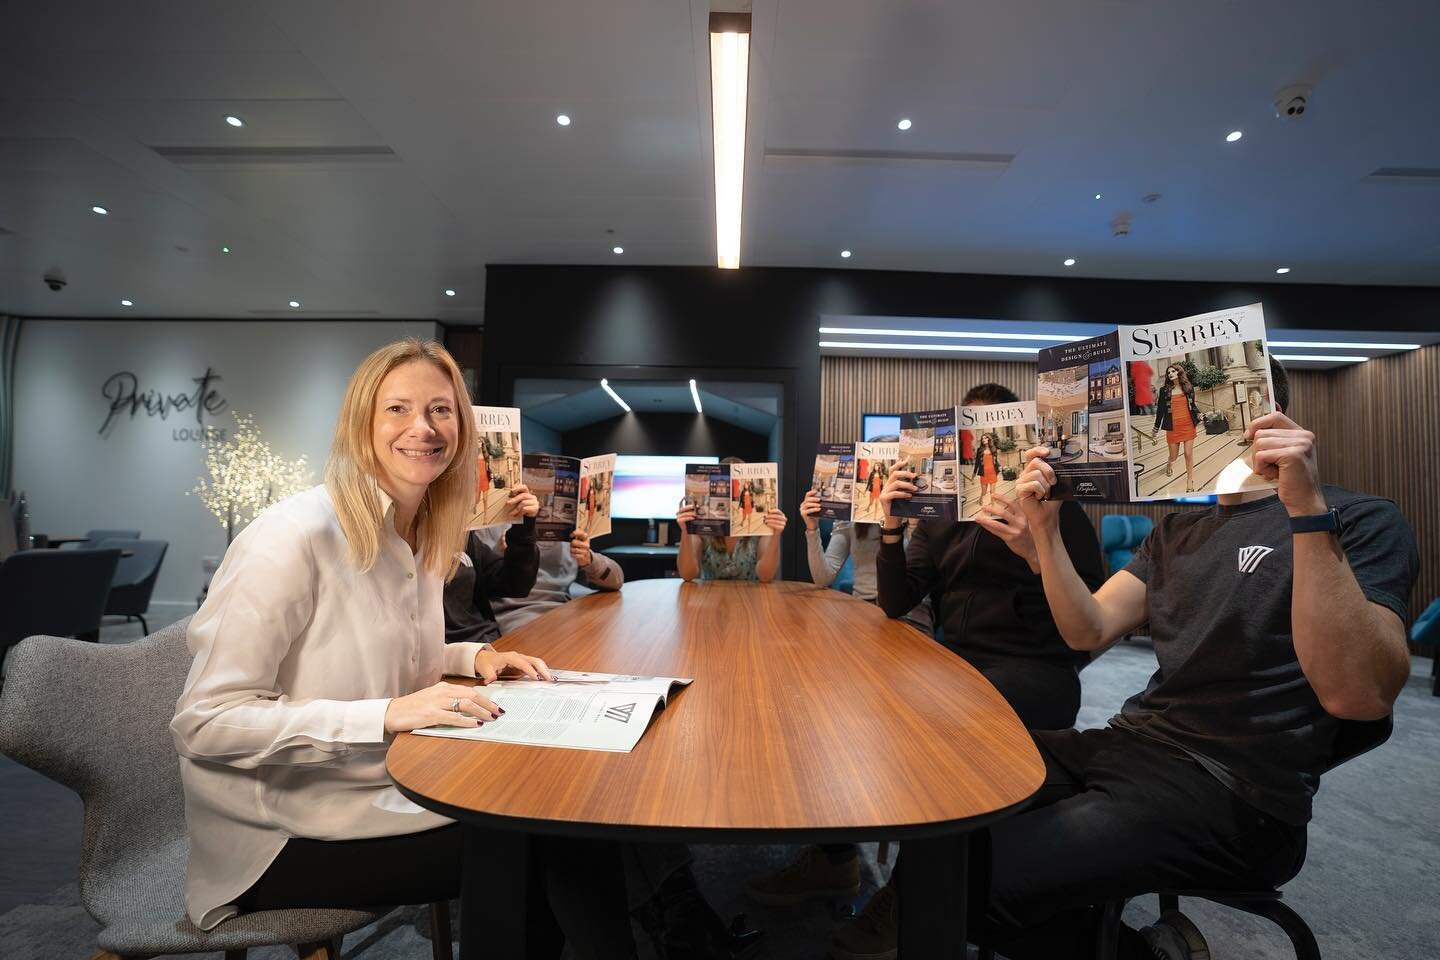 Not sure how much work is getting done today as everyone is reading the article about Lou and Visual Muse in Surrey Magazine. 

#surreymagazine #surrey #visualmuse #magazine #marketingagency #entrpreneur #marketing